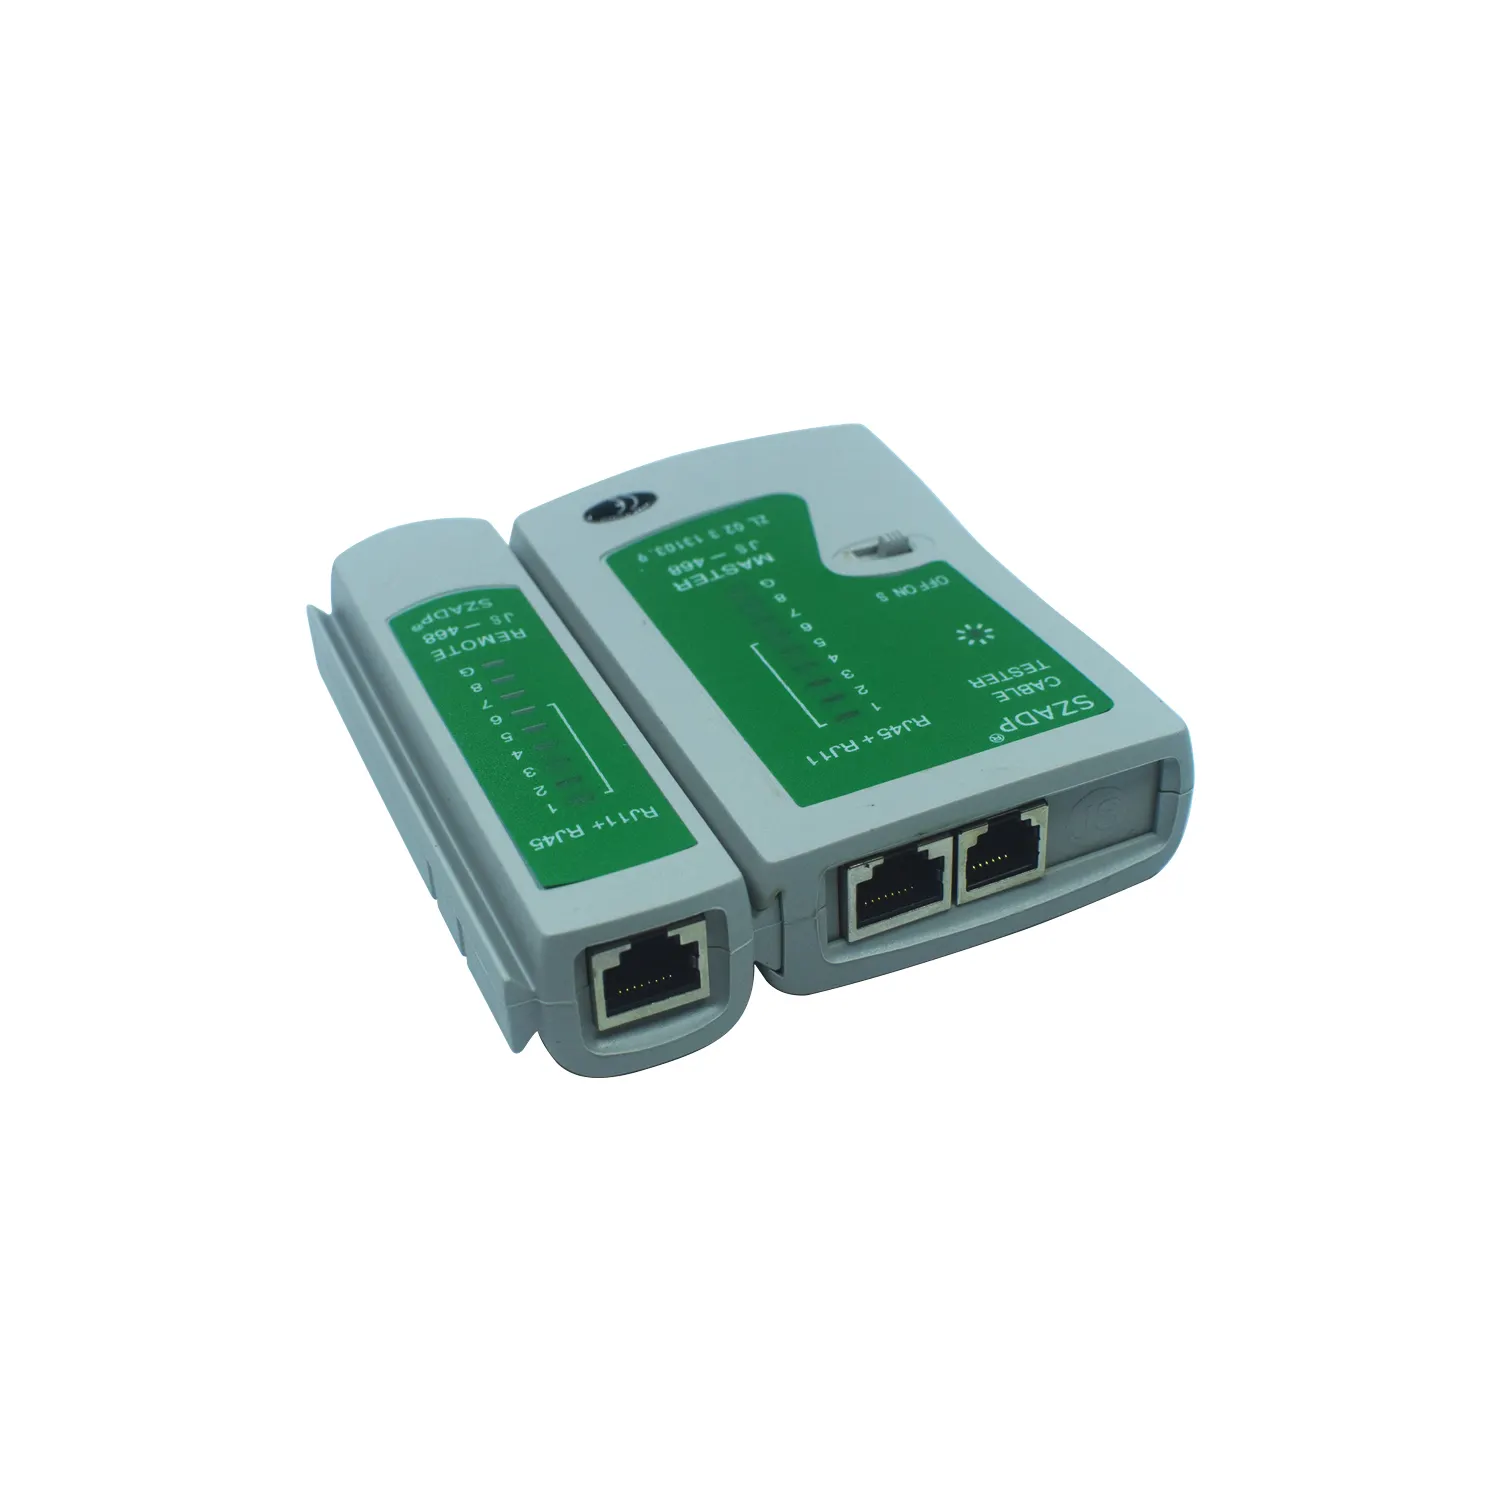 Wholesale RJ45 Cable lan tester Network Cable Tester RJ45 RJ11 RJ12 CAT5 UTP LAN Cable Tester